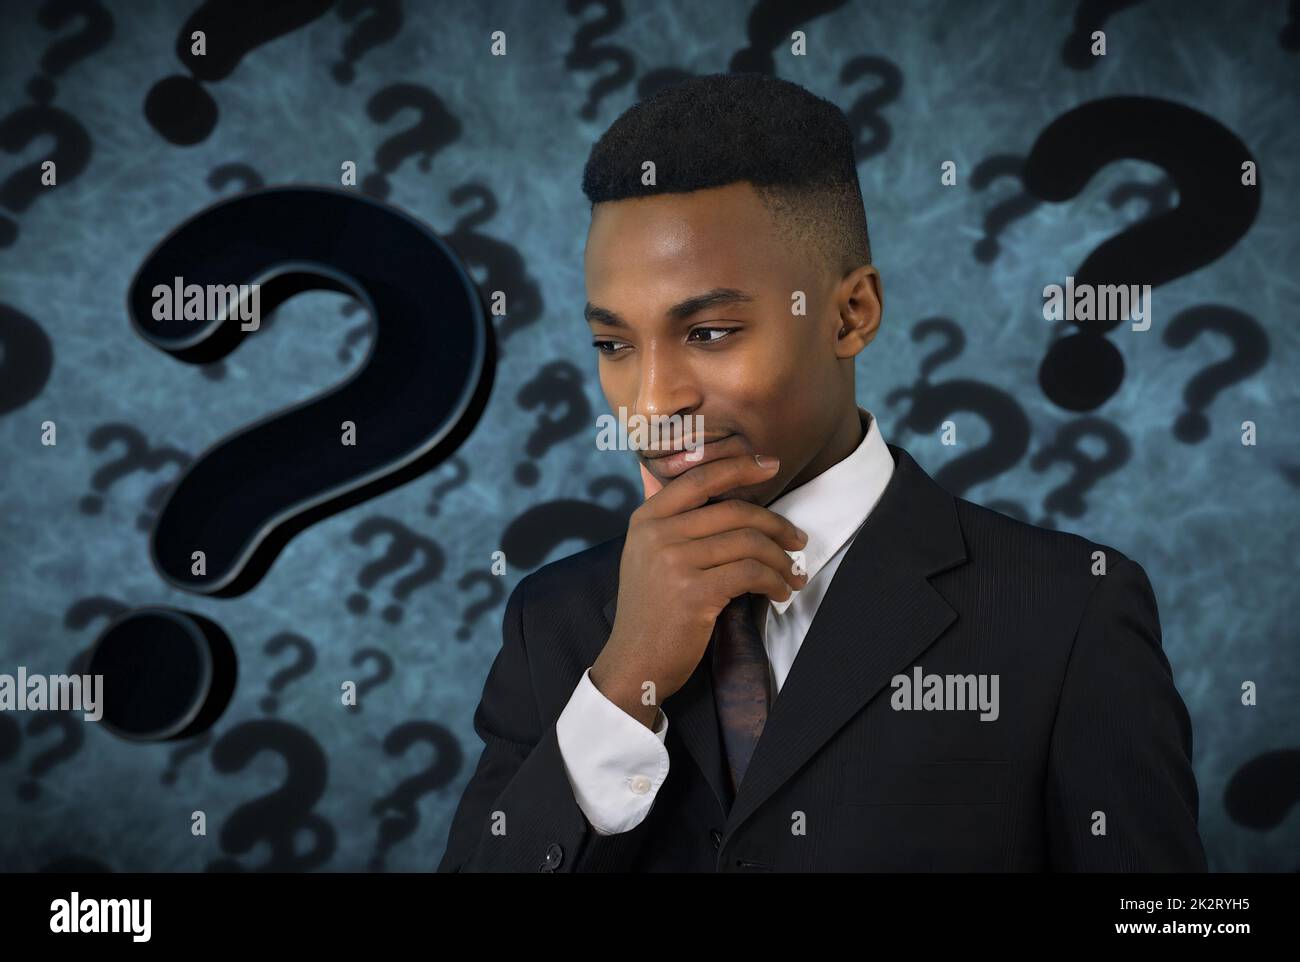 pensive young man thinking doubt expression question mark background Stock Photo